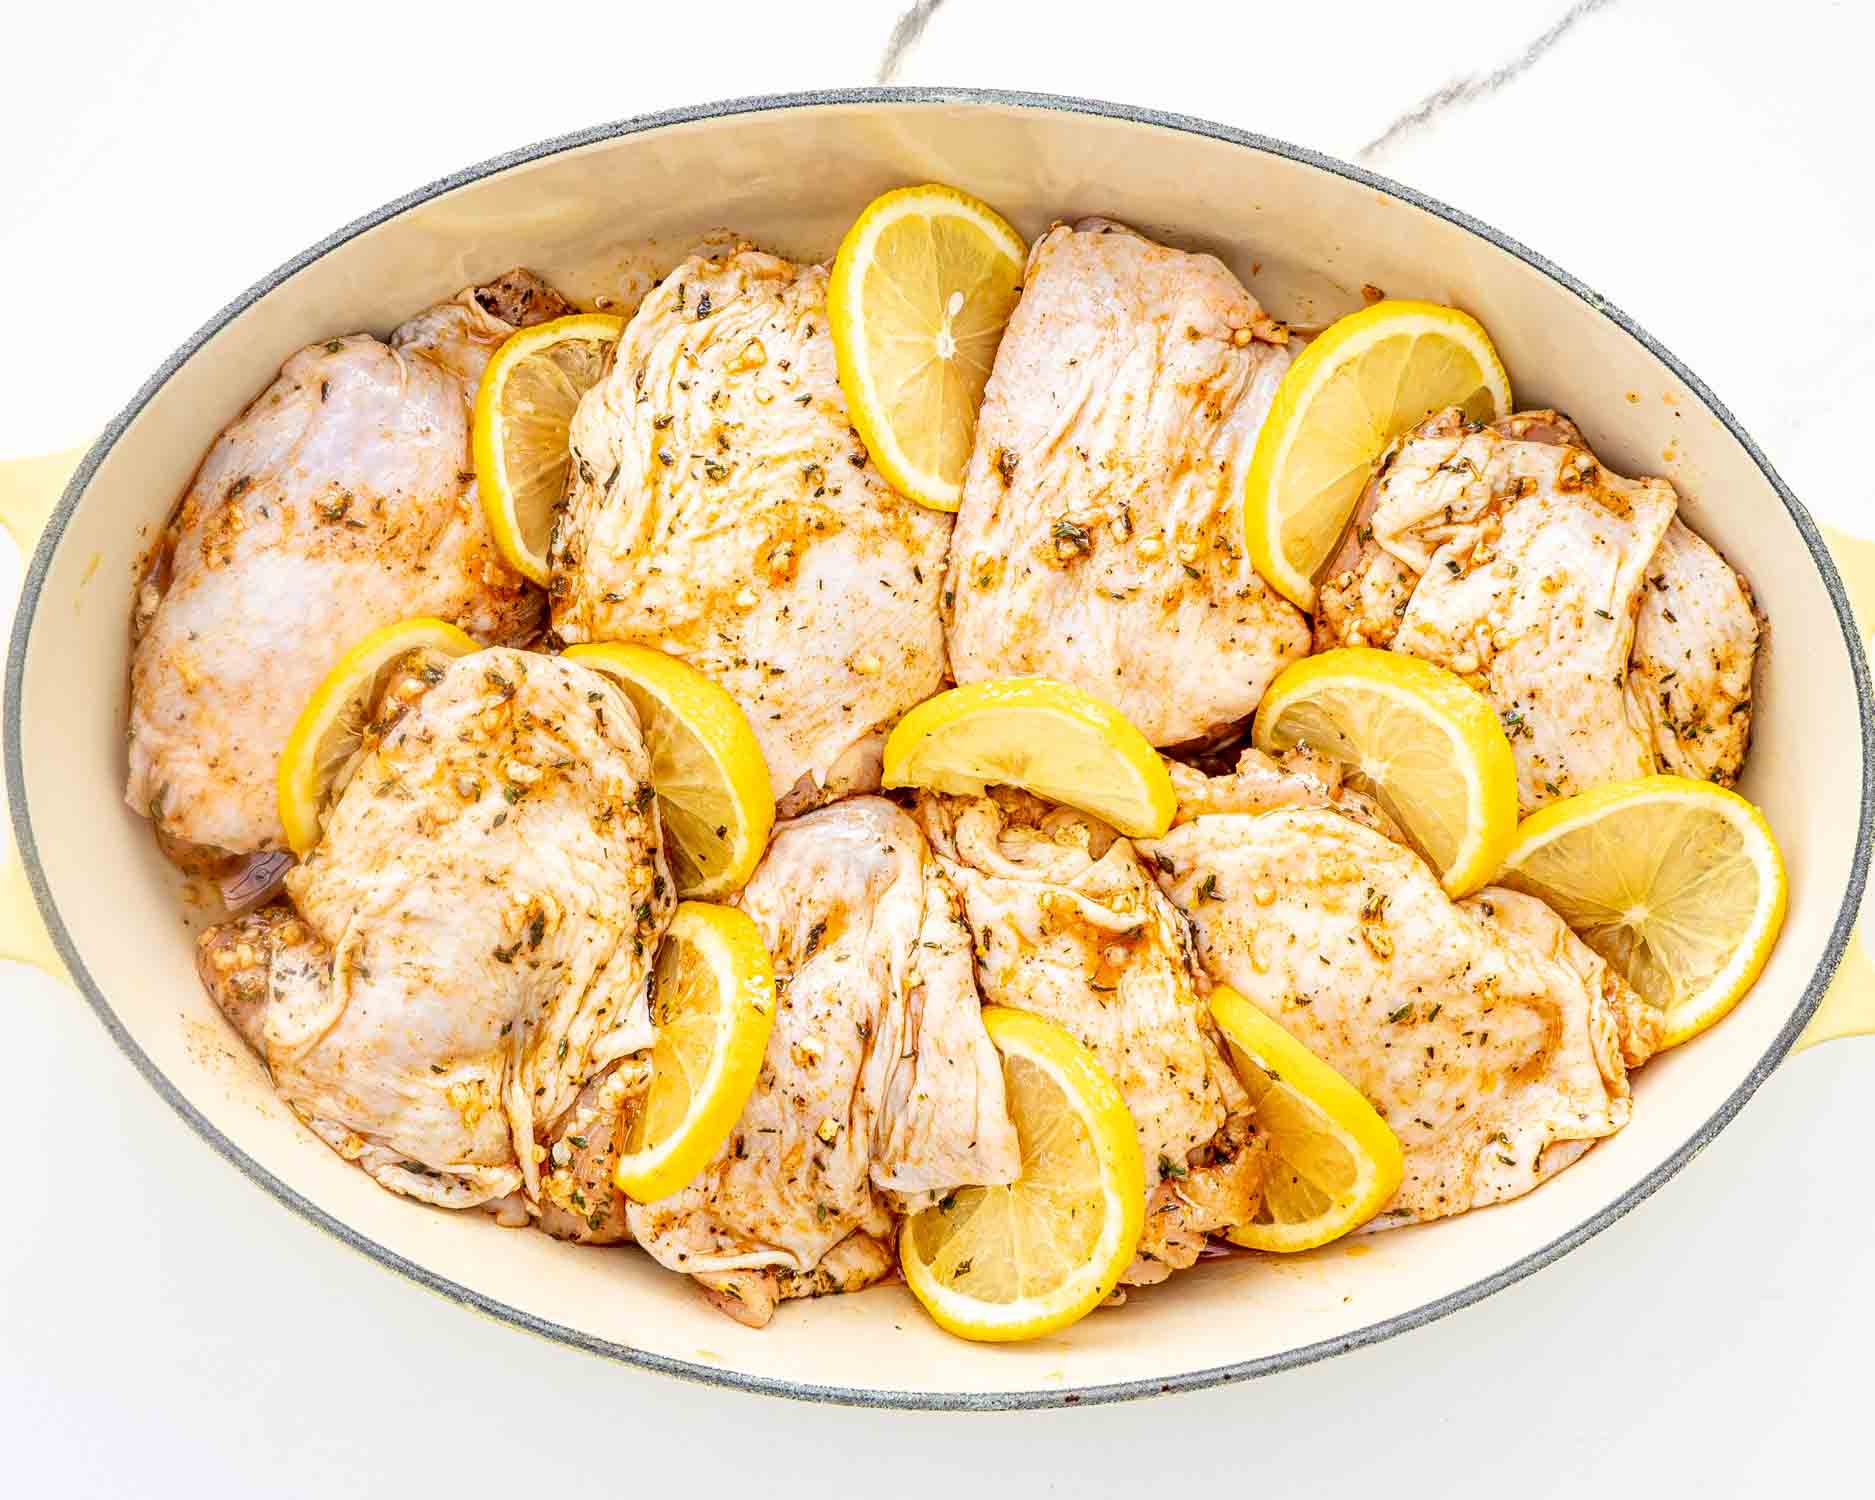 process shots showing how to make baked lemon chicken thighs.